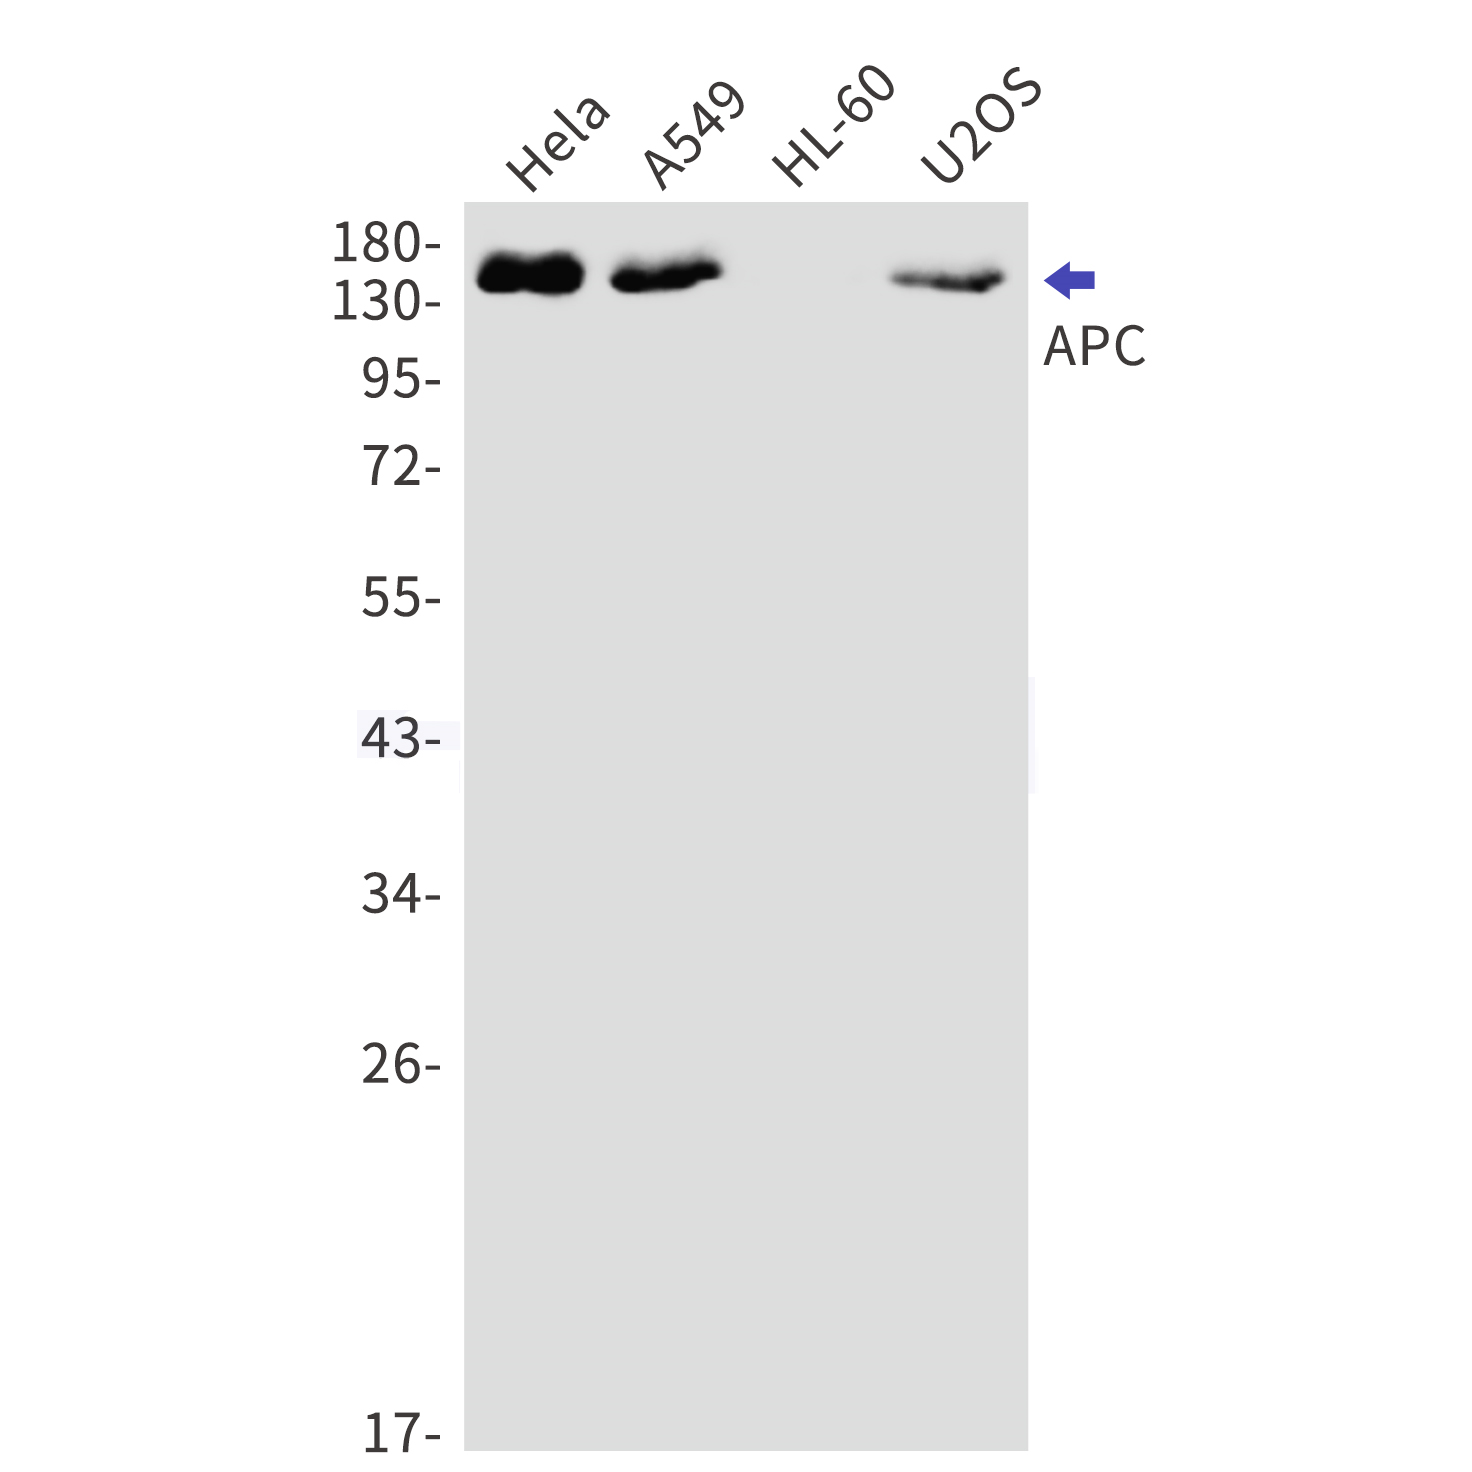 Western blot detection of APC in Hela,A549,HL-60,U2OS cell lysates using APC Rabbit mAb(1:1000 diluted).Predicted band size:312kDa.Observed band size:160kDa.